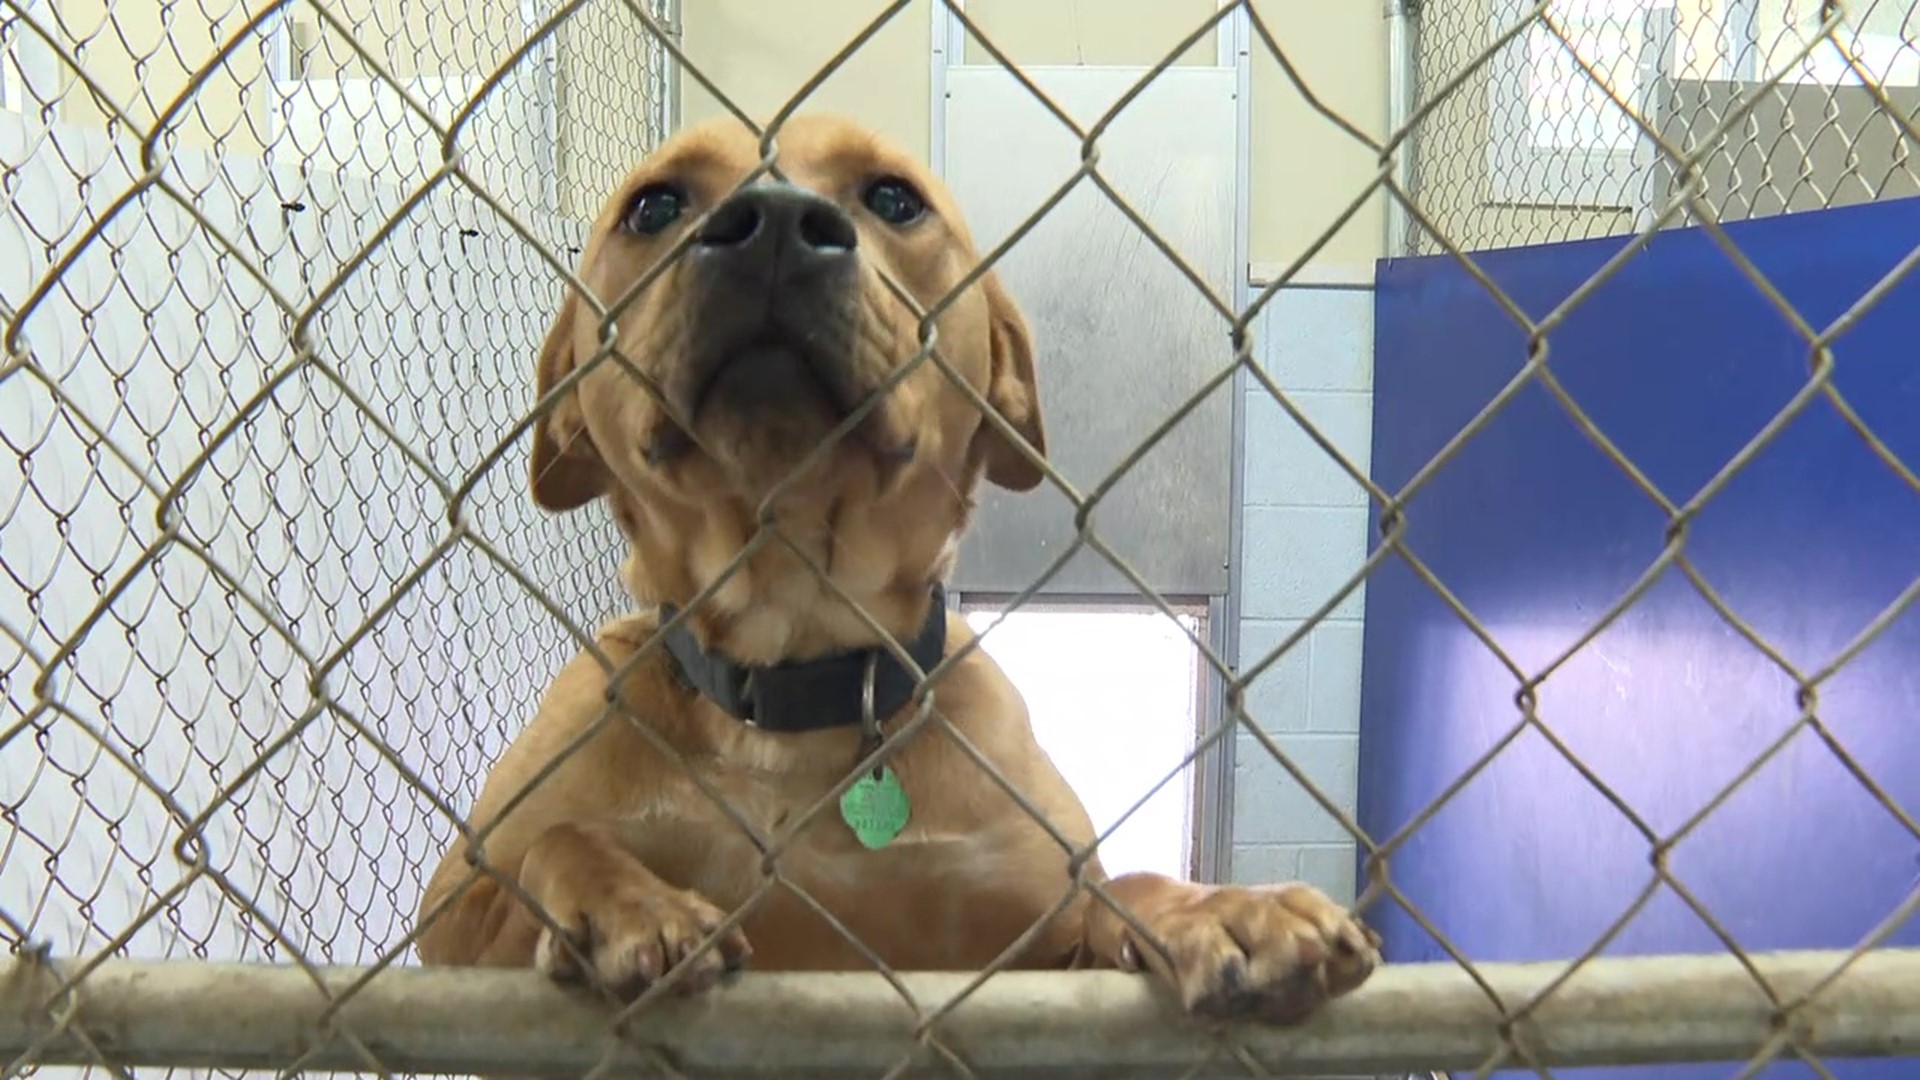 Animal shelters: It's the right time to adopt | wnep.com